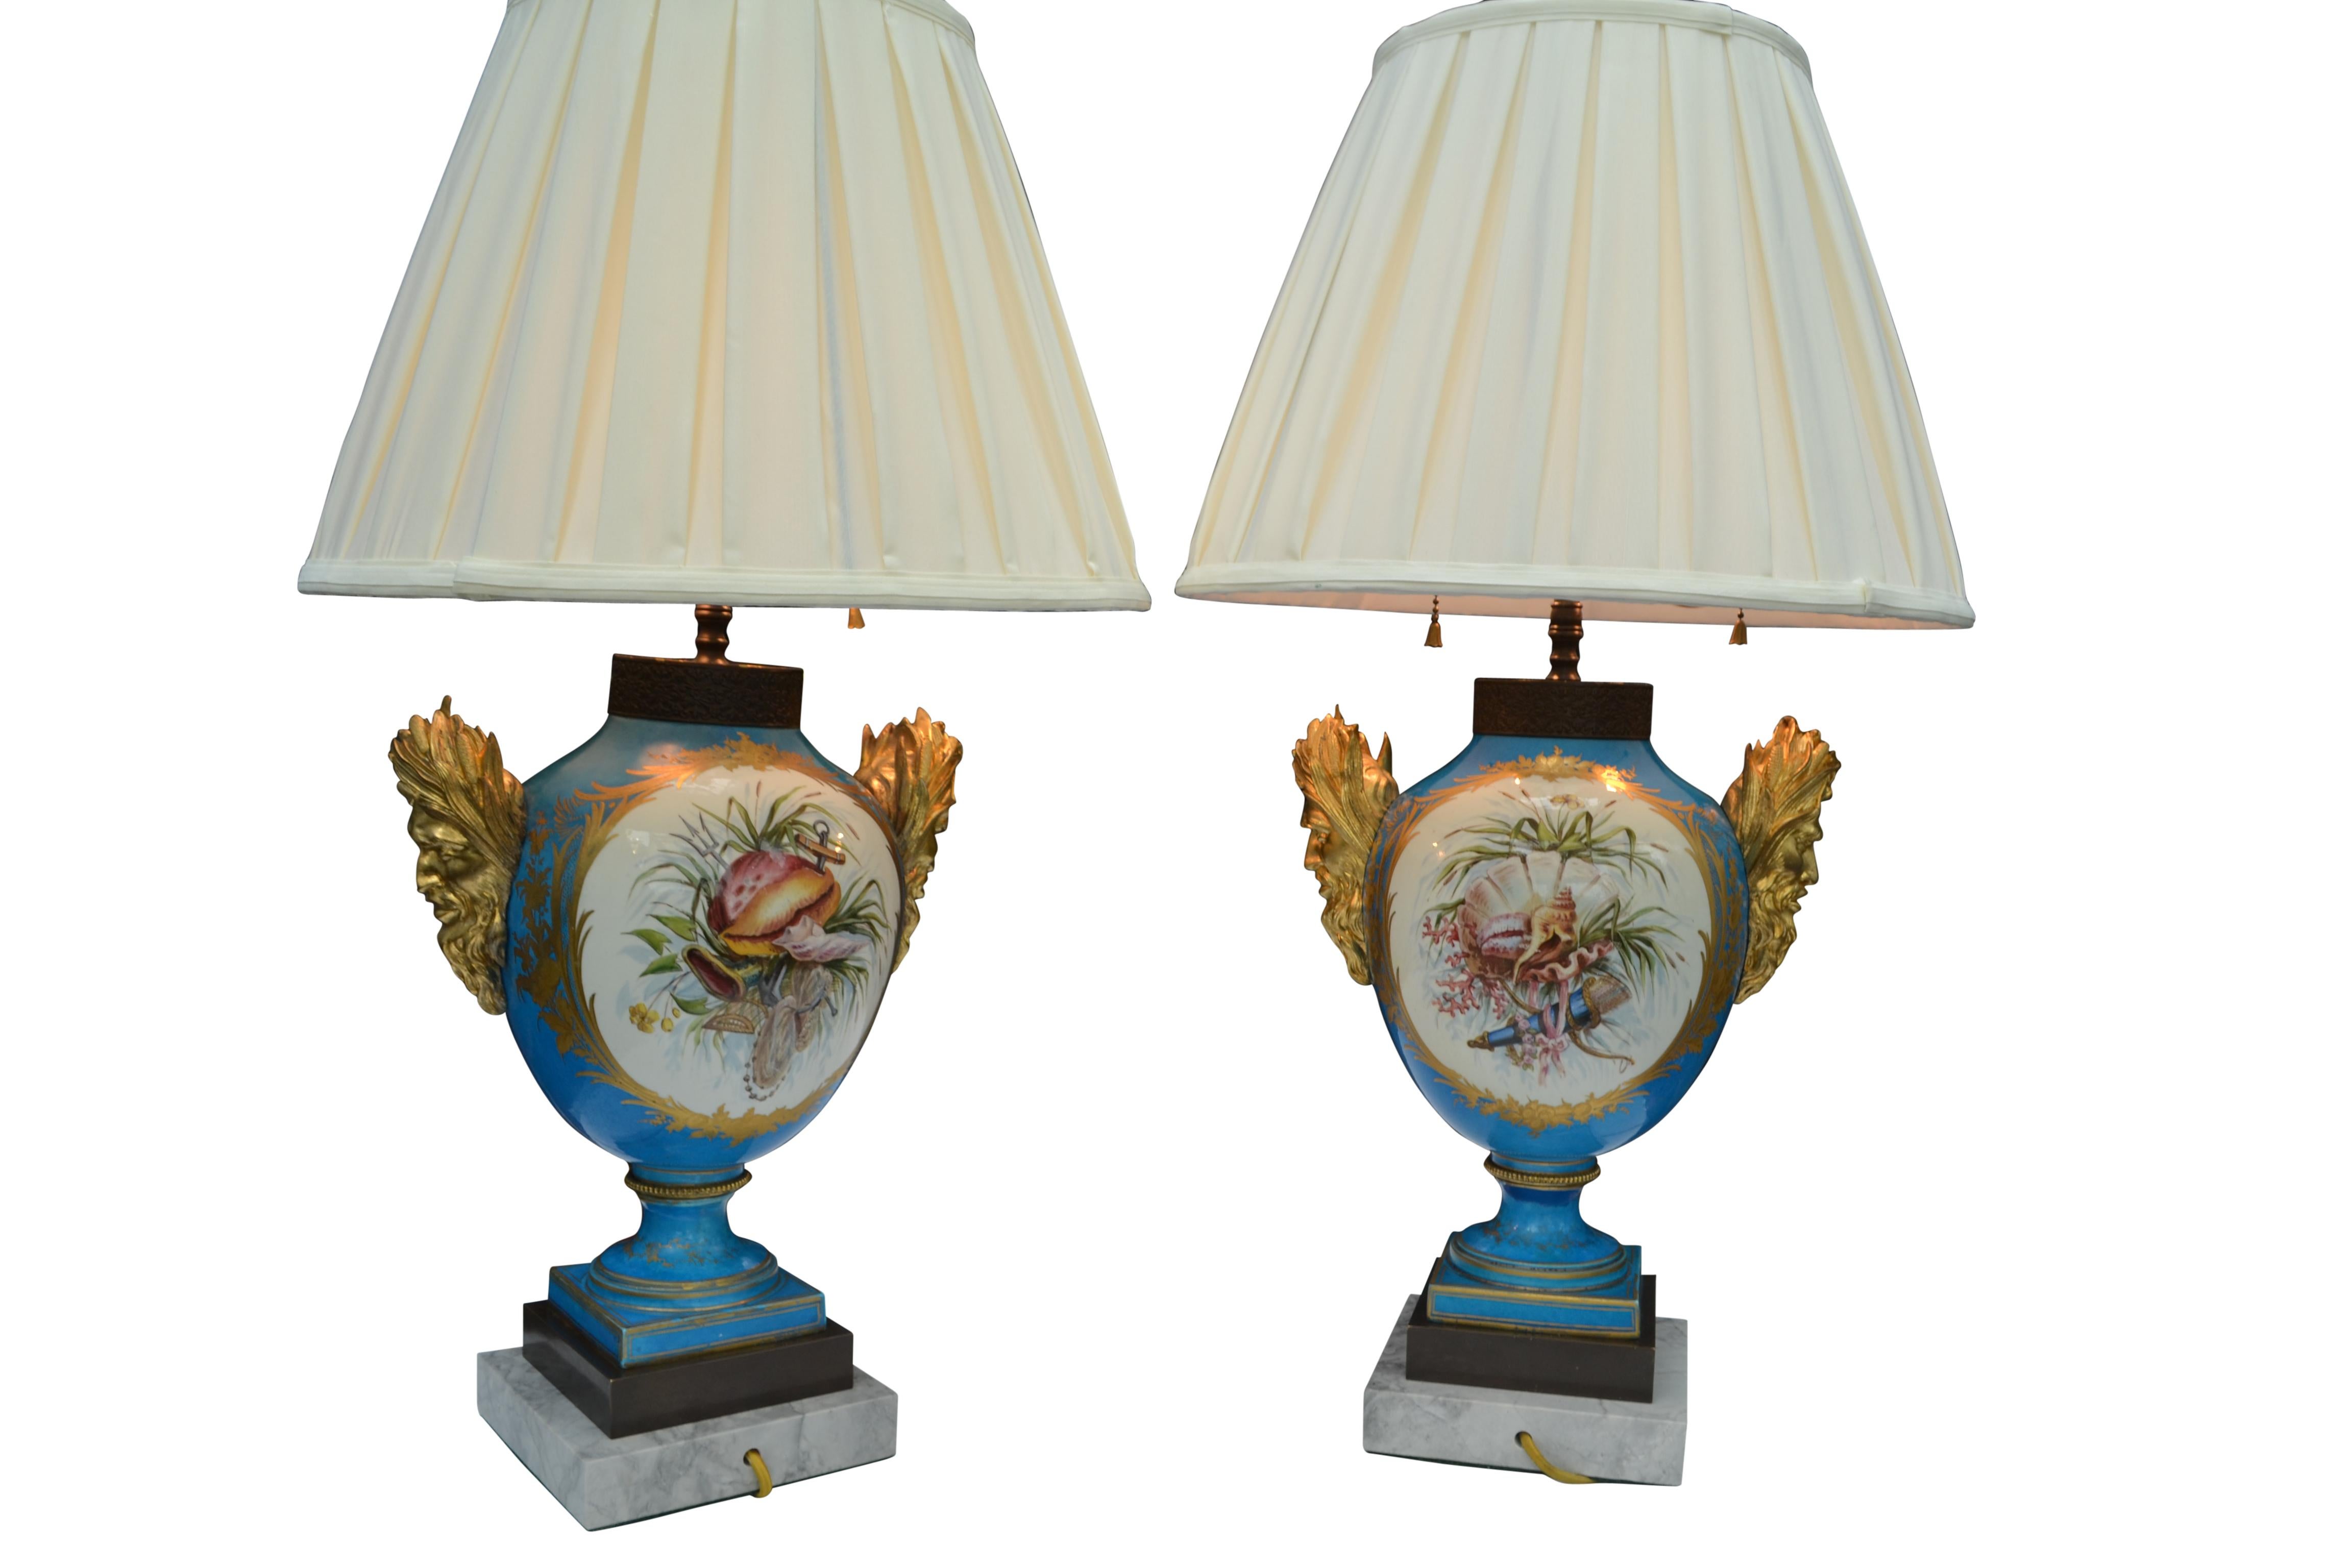 A truly fine pair of blue celeste ground Sèvres Porcelain baluster vases with exceptional gilt bronze mascaron handles. Designed in the Rococo style, the vases display hand painted panels depicting scenes from Greek Mythology with Poseidon and